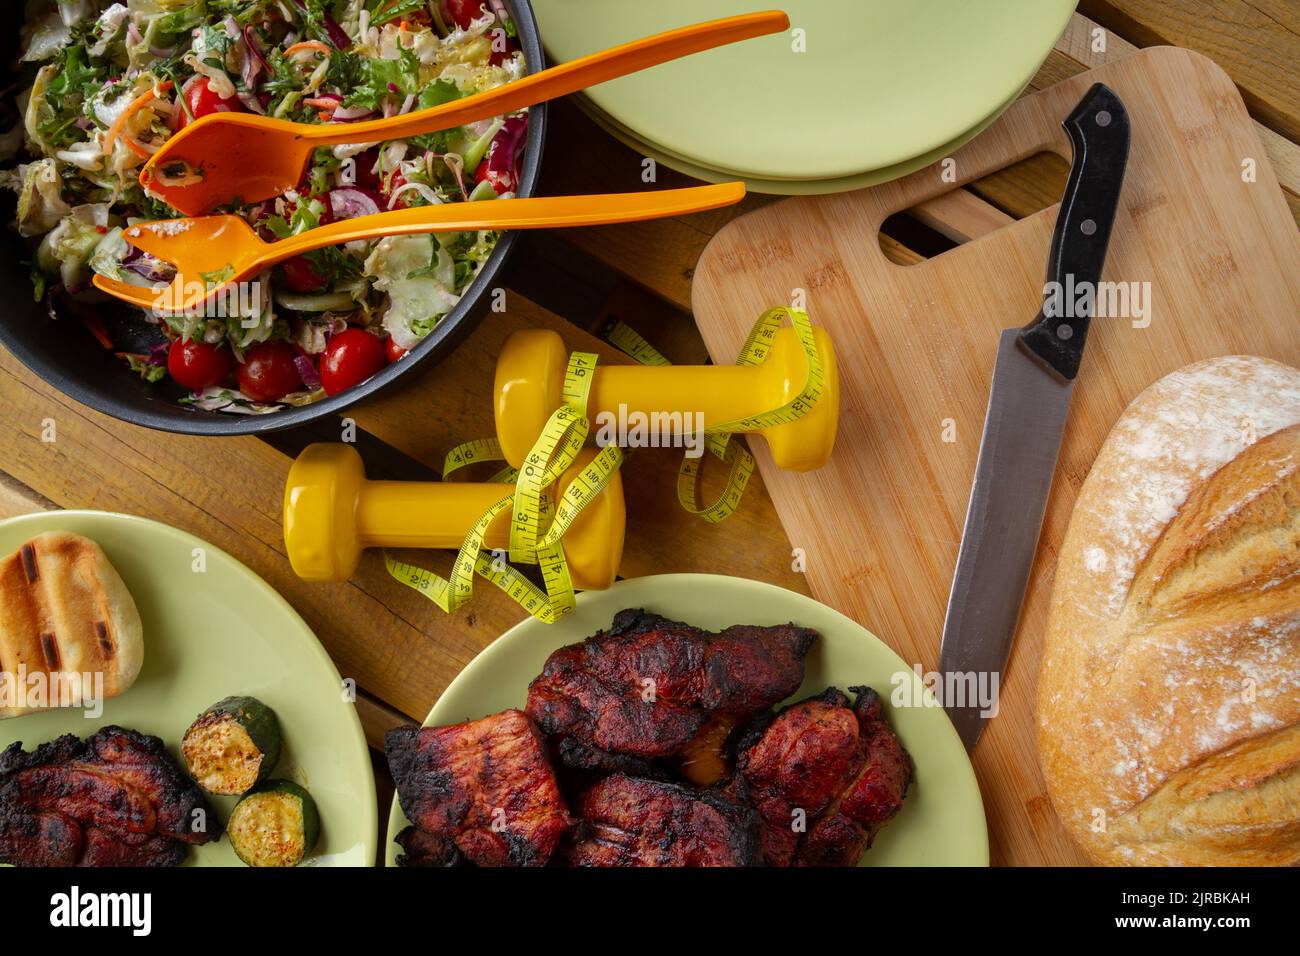 https://c8.alamy.com/comp/2JRBKAH/dumbbells-with-tape-measure-vegetable-salad-bread-grilled-pork-neck-meat-from-barbecue-fit-gym-grill-party-concept-healthy-or-bad-diet-choice-2JRBKAH.jpg